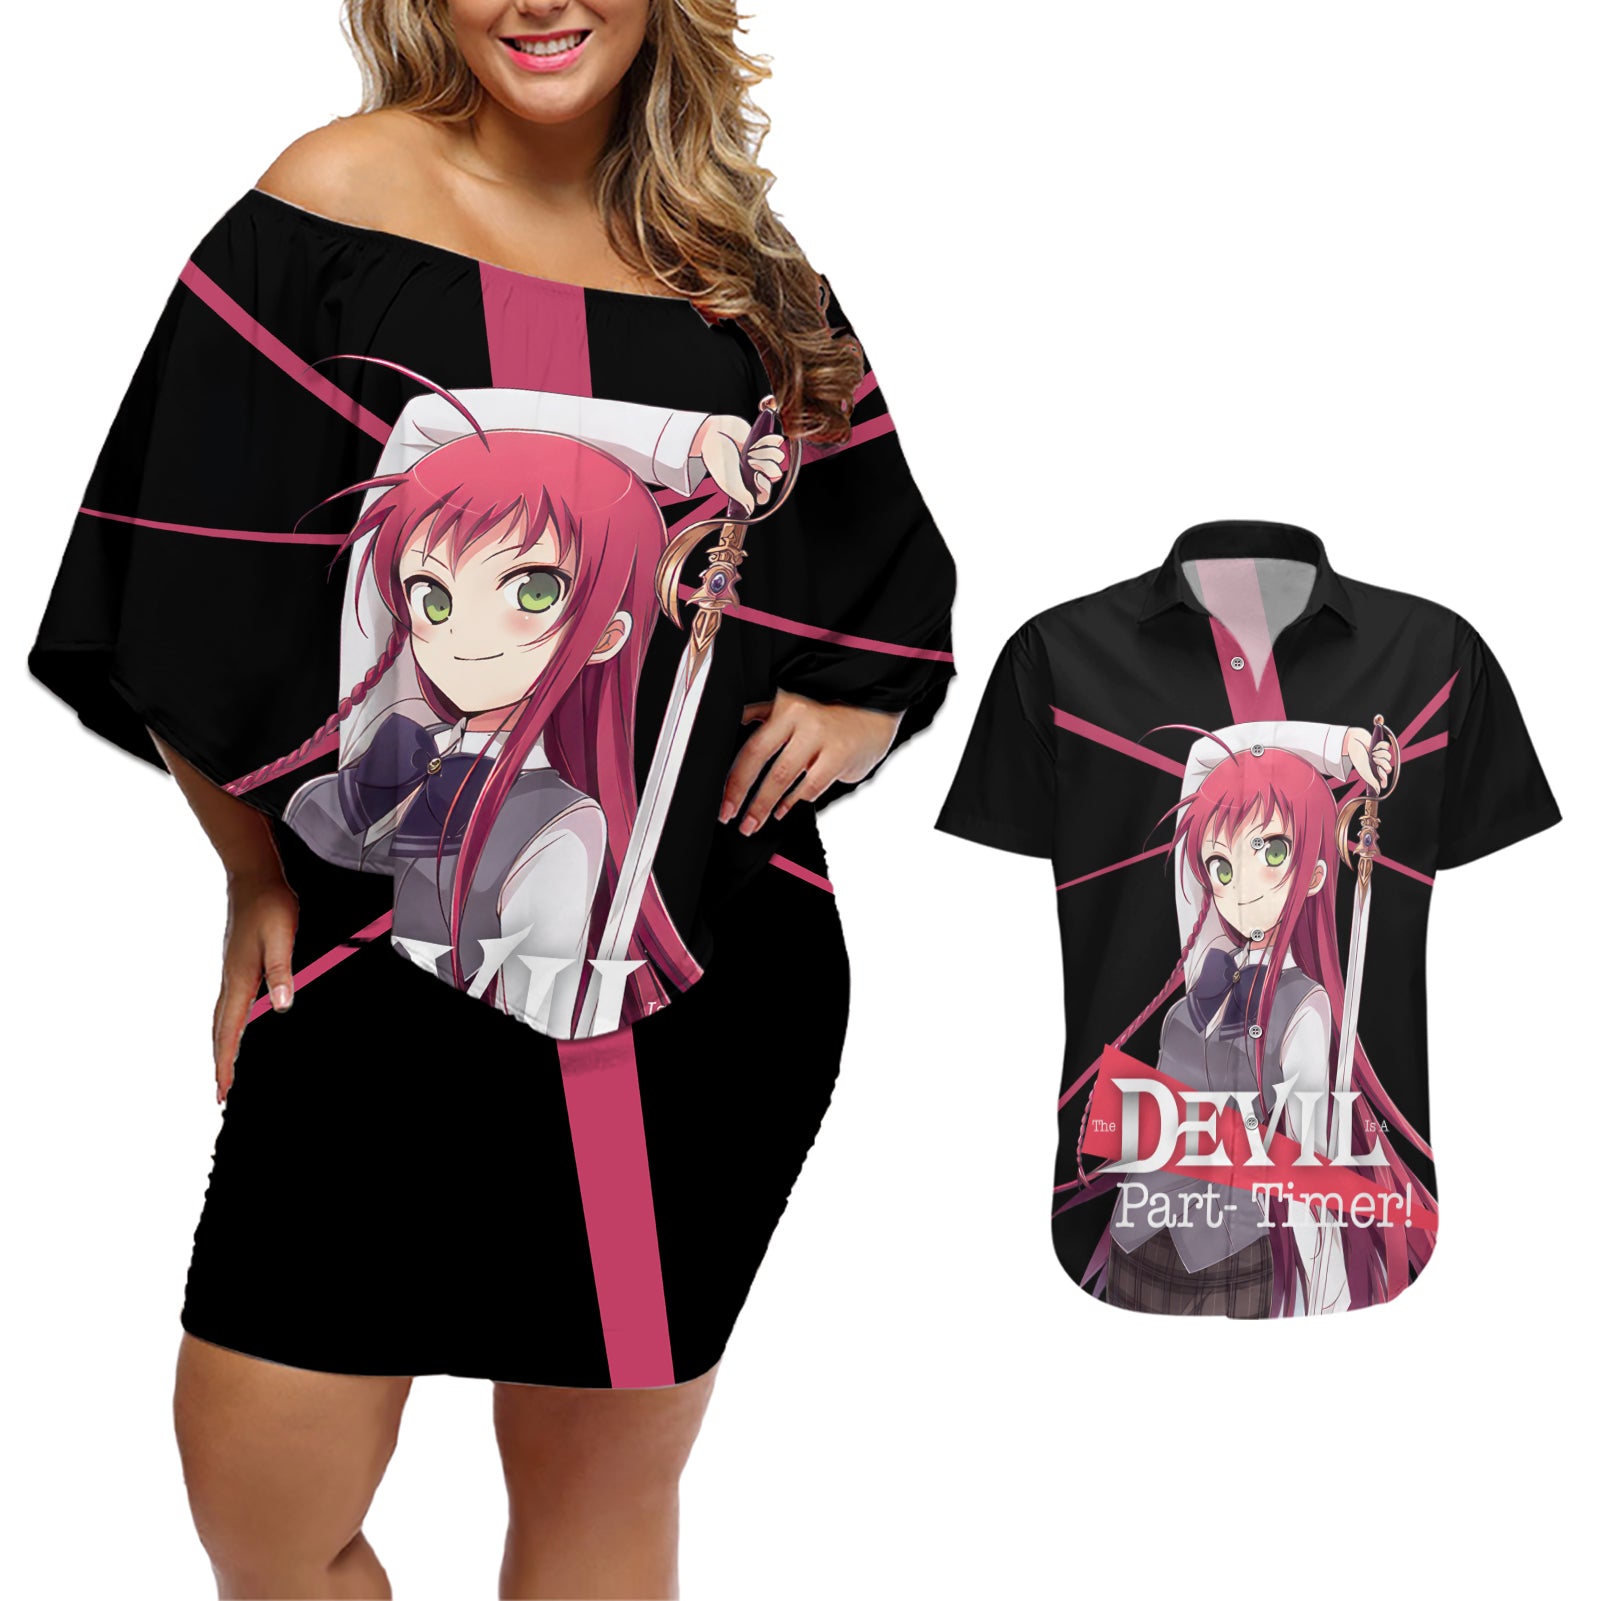 Emi Yusa The Devil Part Timer Couples Matching Off Shoulder Short Dress and Hawaiian Shirt Anime Style